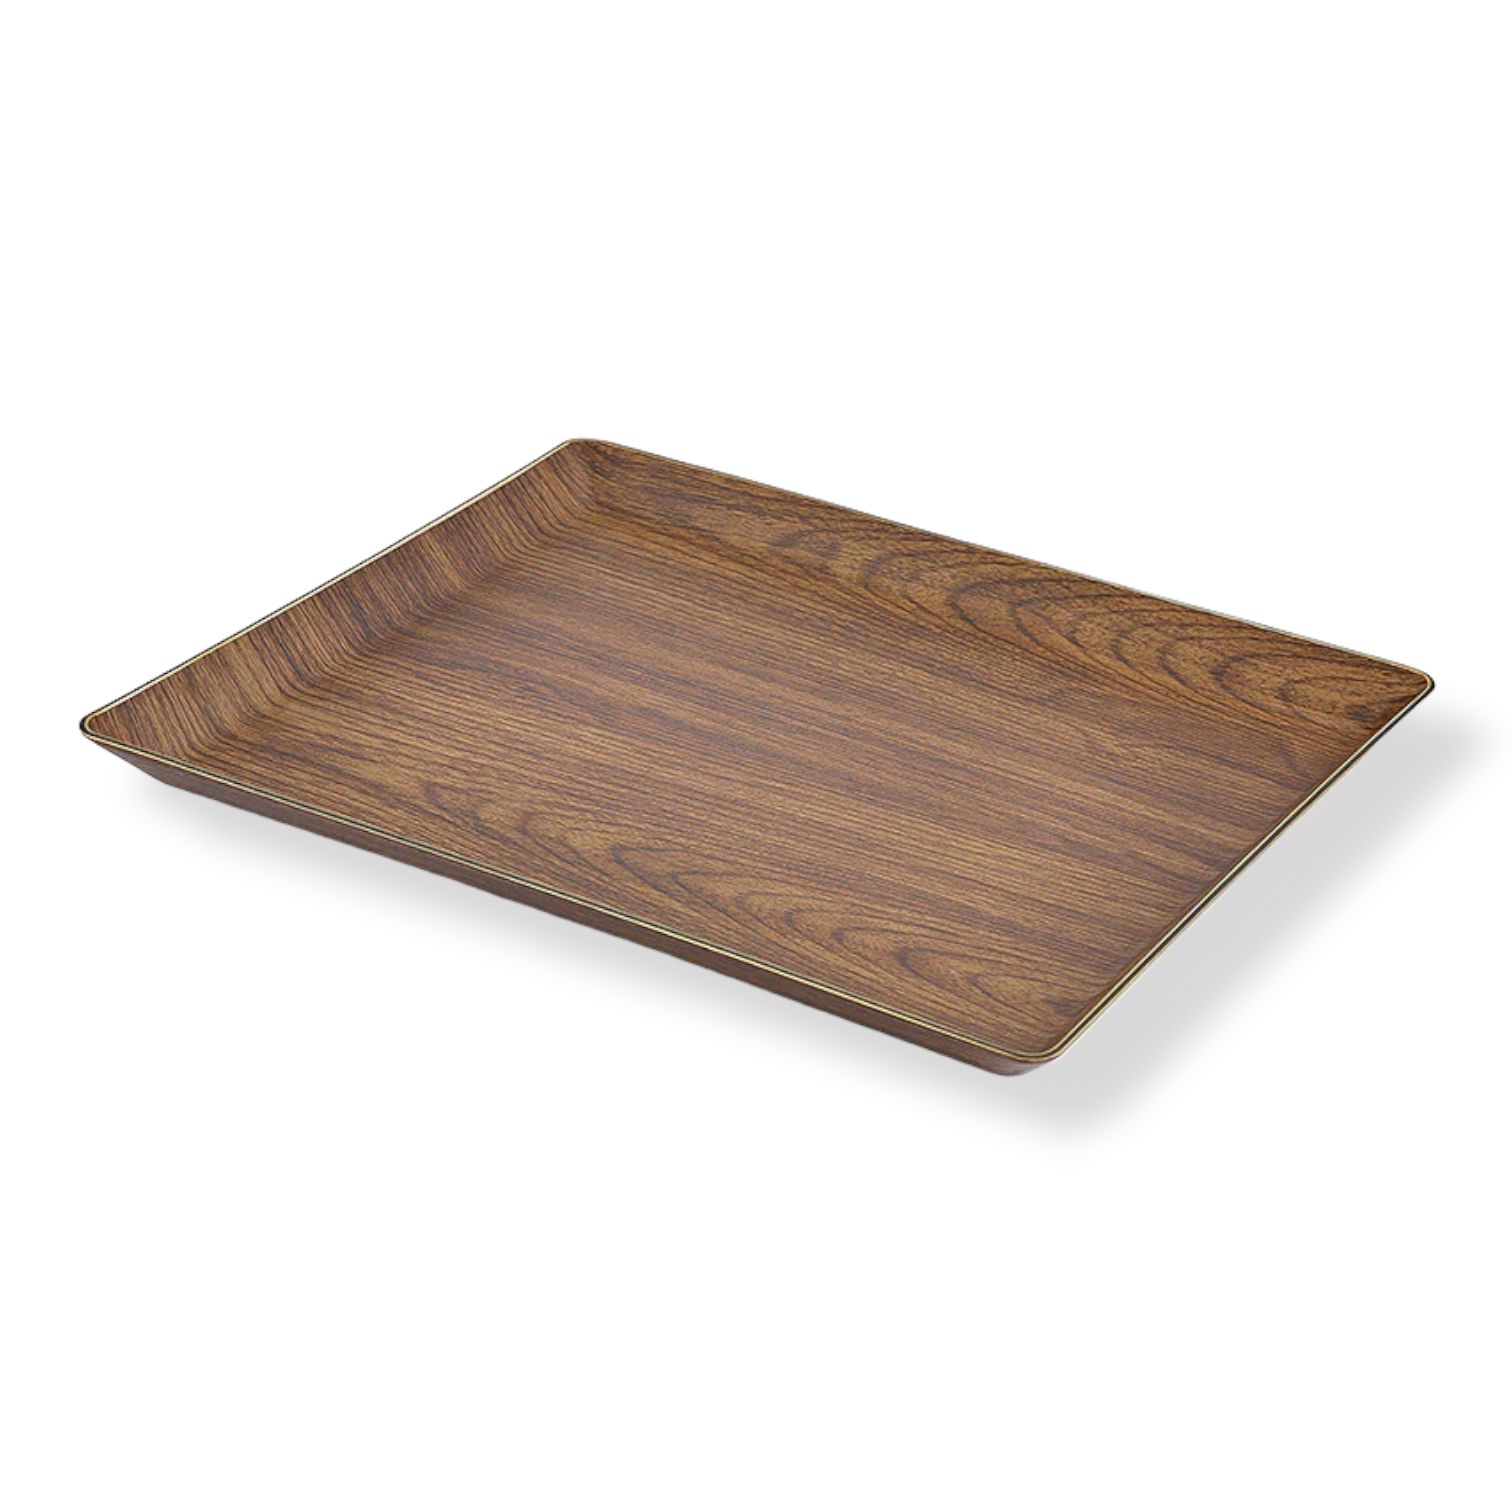 Small Plastic Tray with Wooden Finish - Lunaz Shop